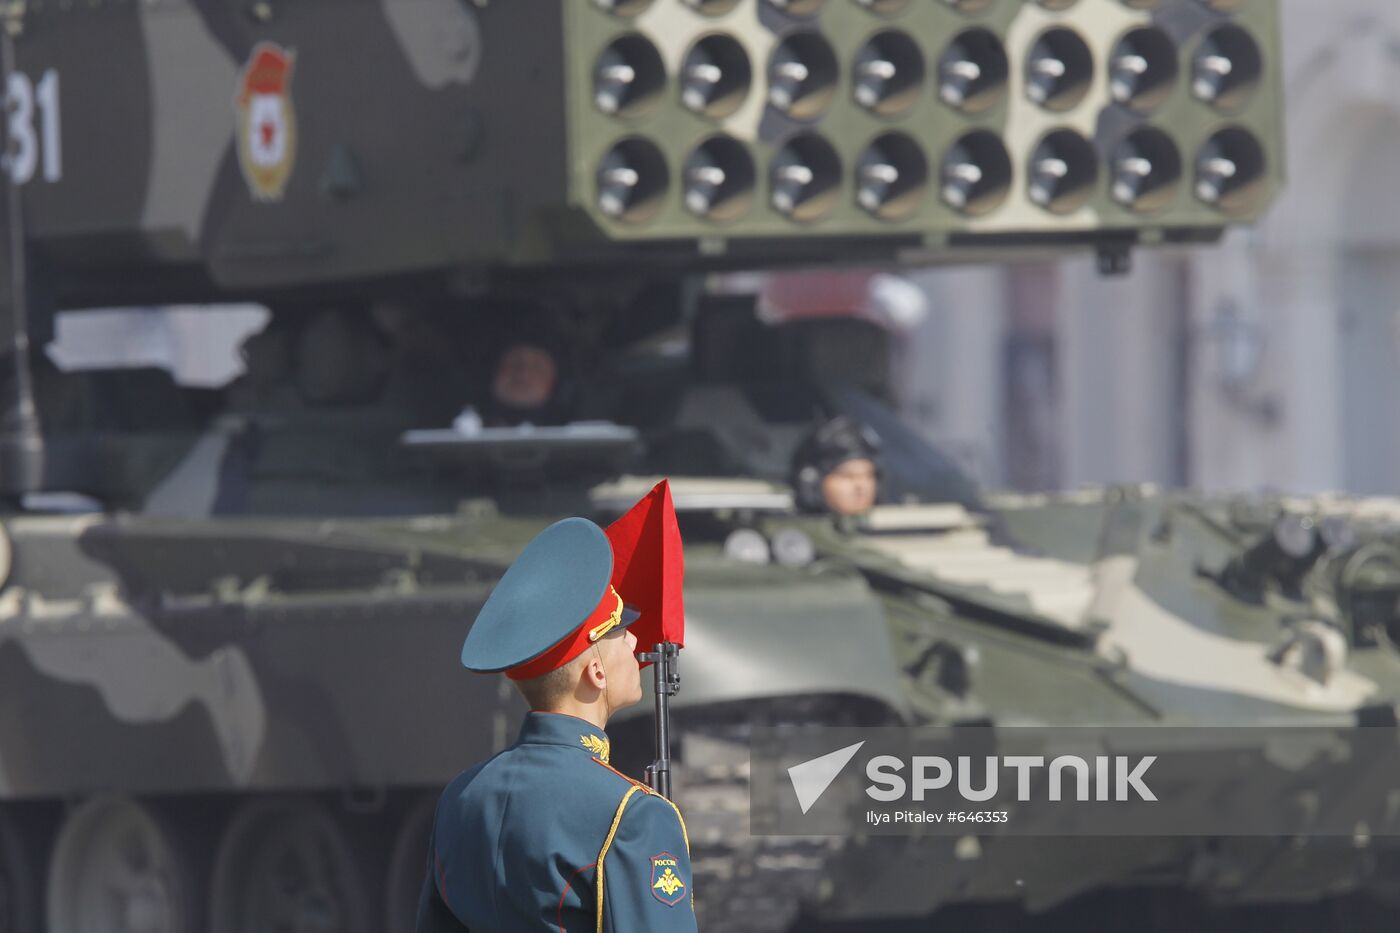 Military Parade on 65th anniversary of VE Day